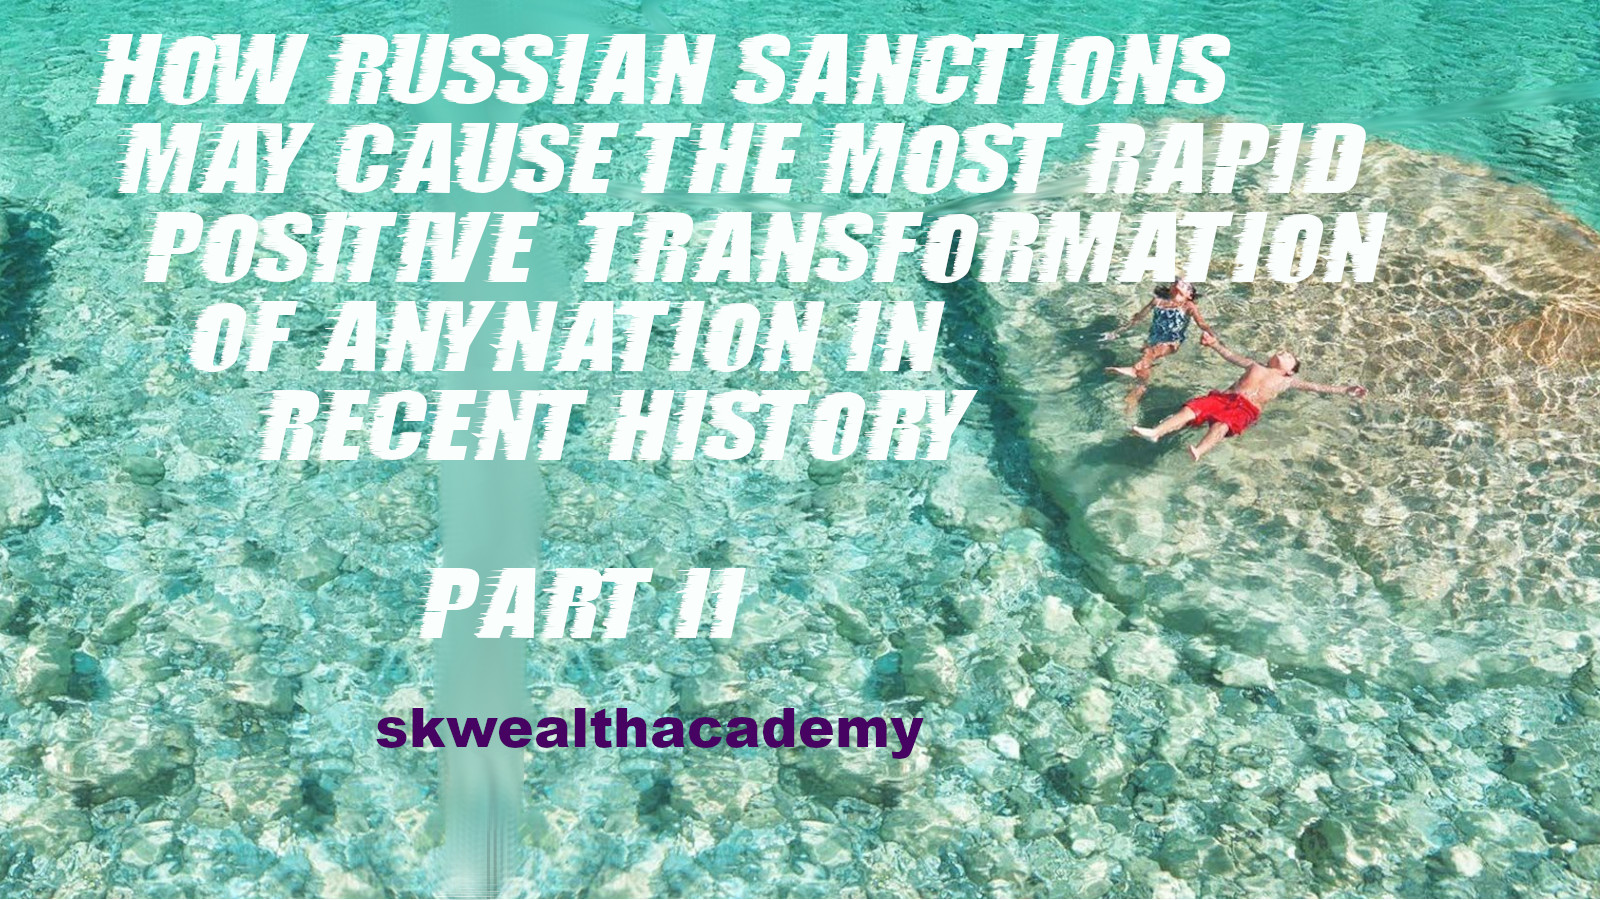 Russian economic sanctions, part II: Major global companies that have withdrawn from Russia or are closing operations in Russia due to the Russian invasion of Ukraine.